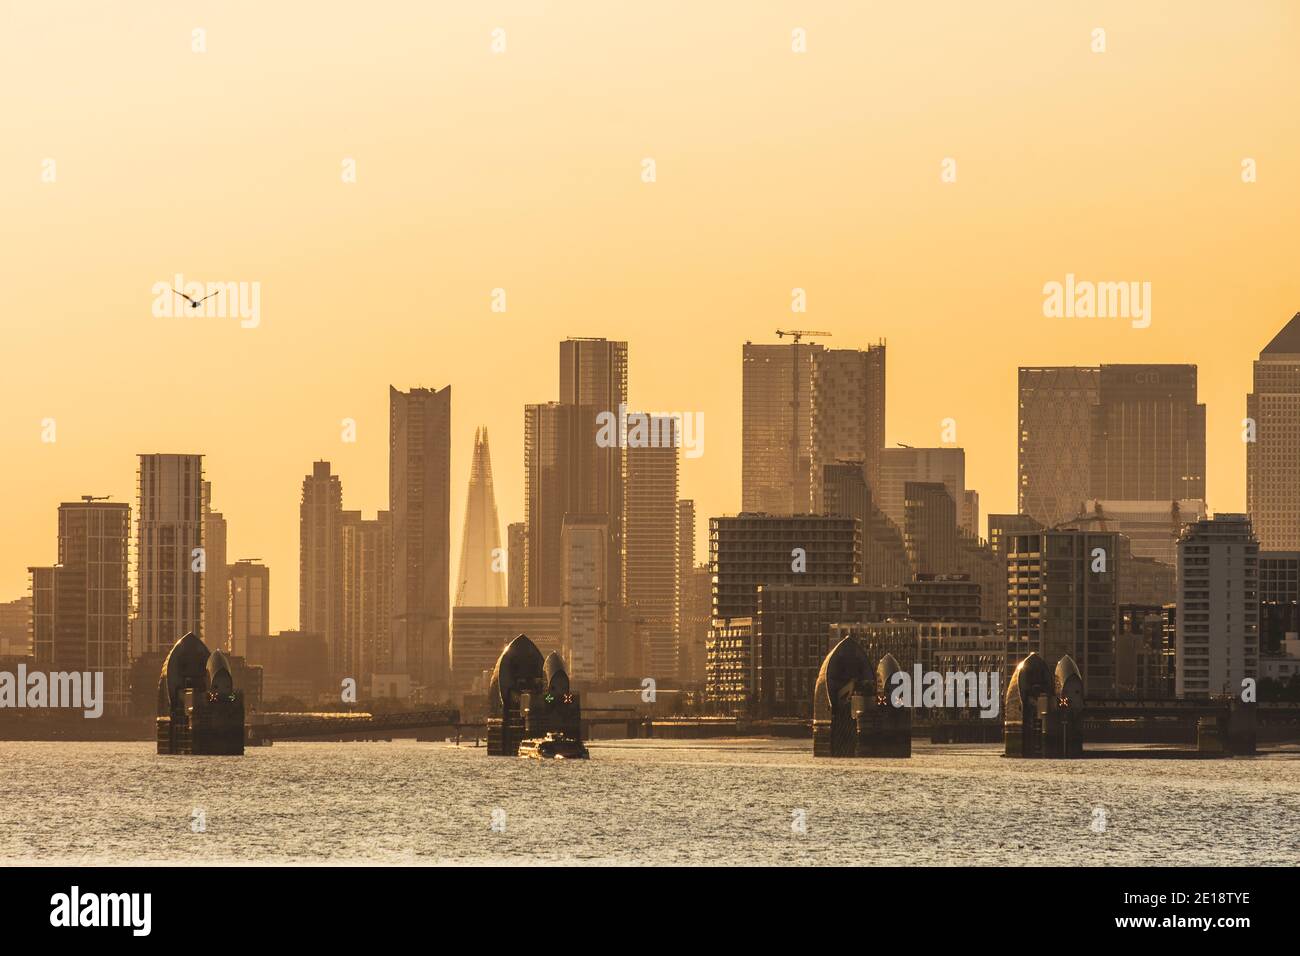 The Thames Barrier with Canary Wharf on the background. Stock Photo